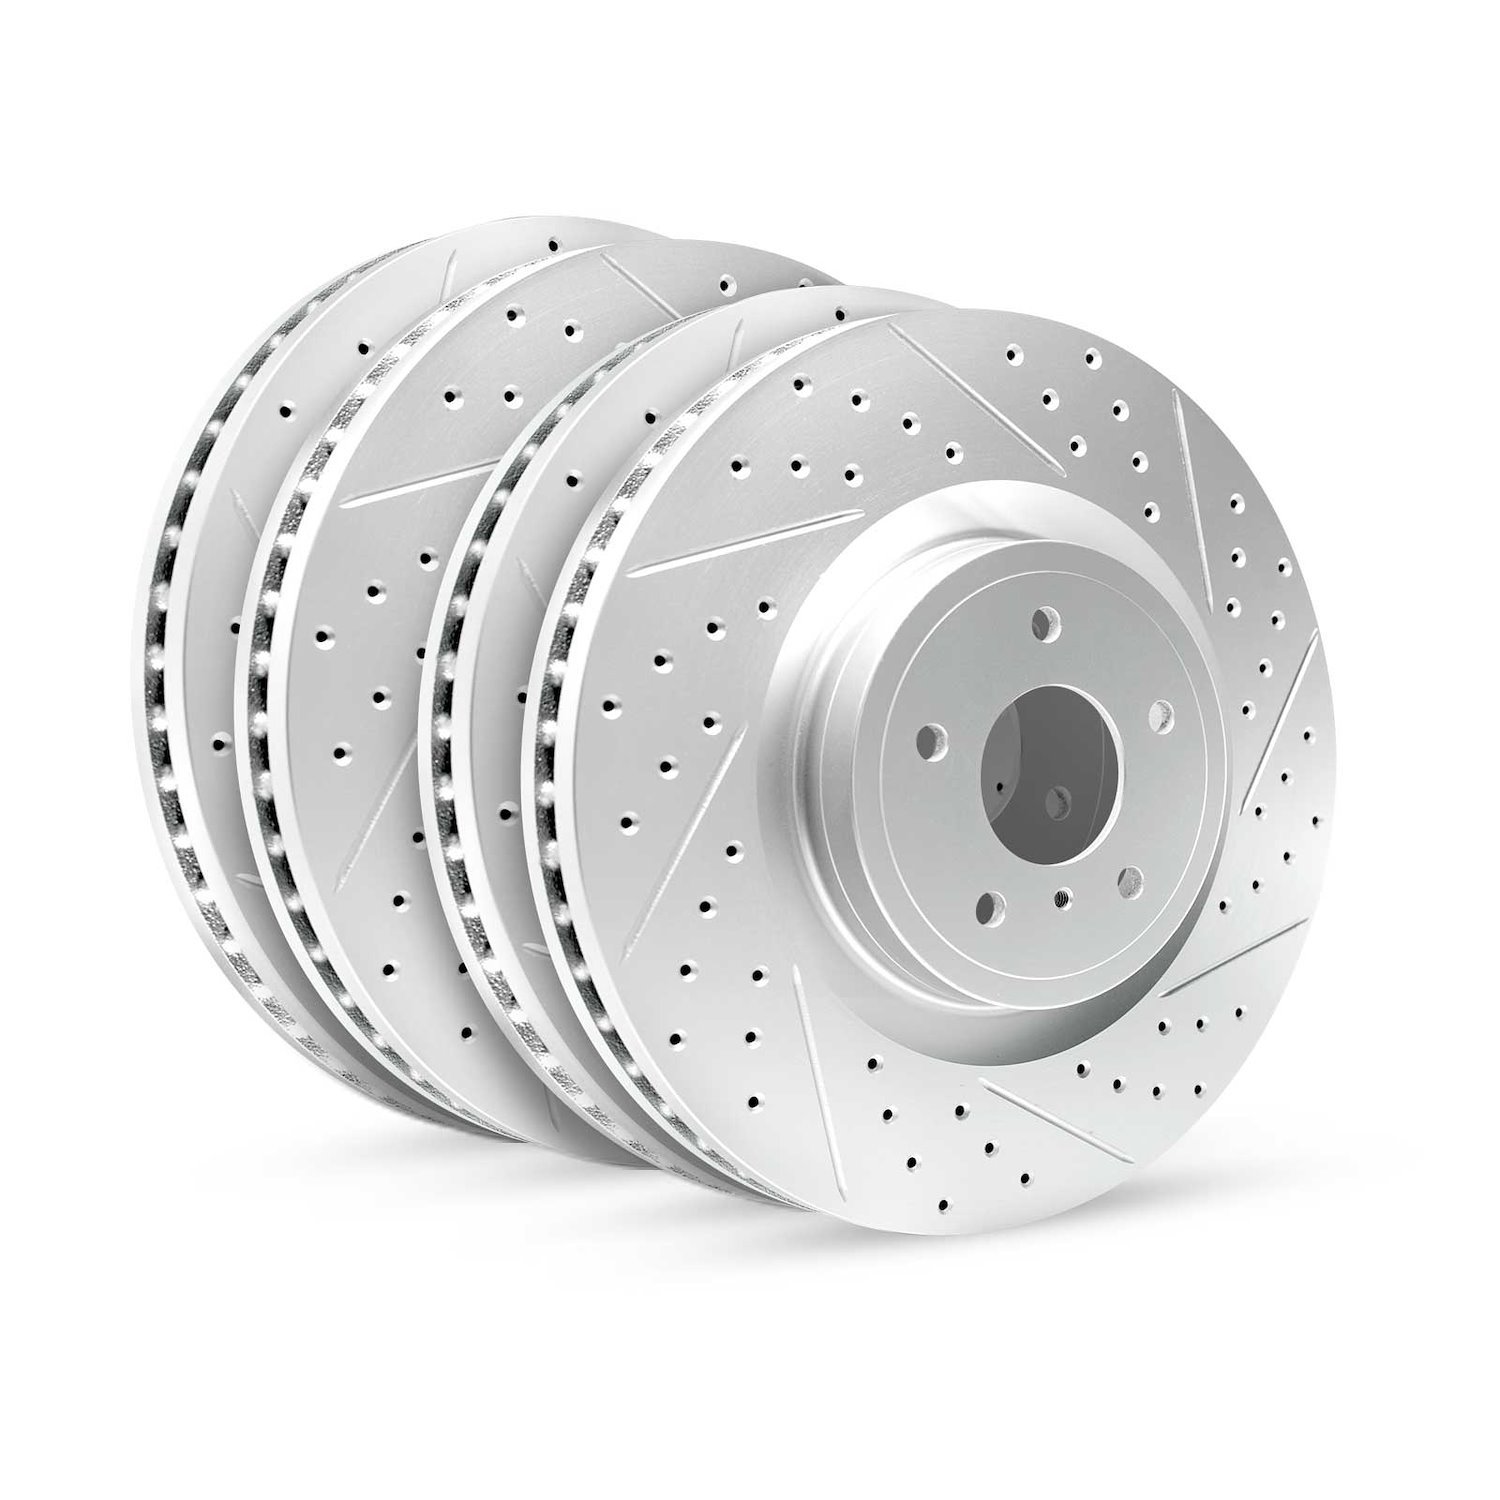 GEO-Carbon Drilled/Slotted Rotors, 2006-2012 Mitsubishi, Position: Front/Rear